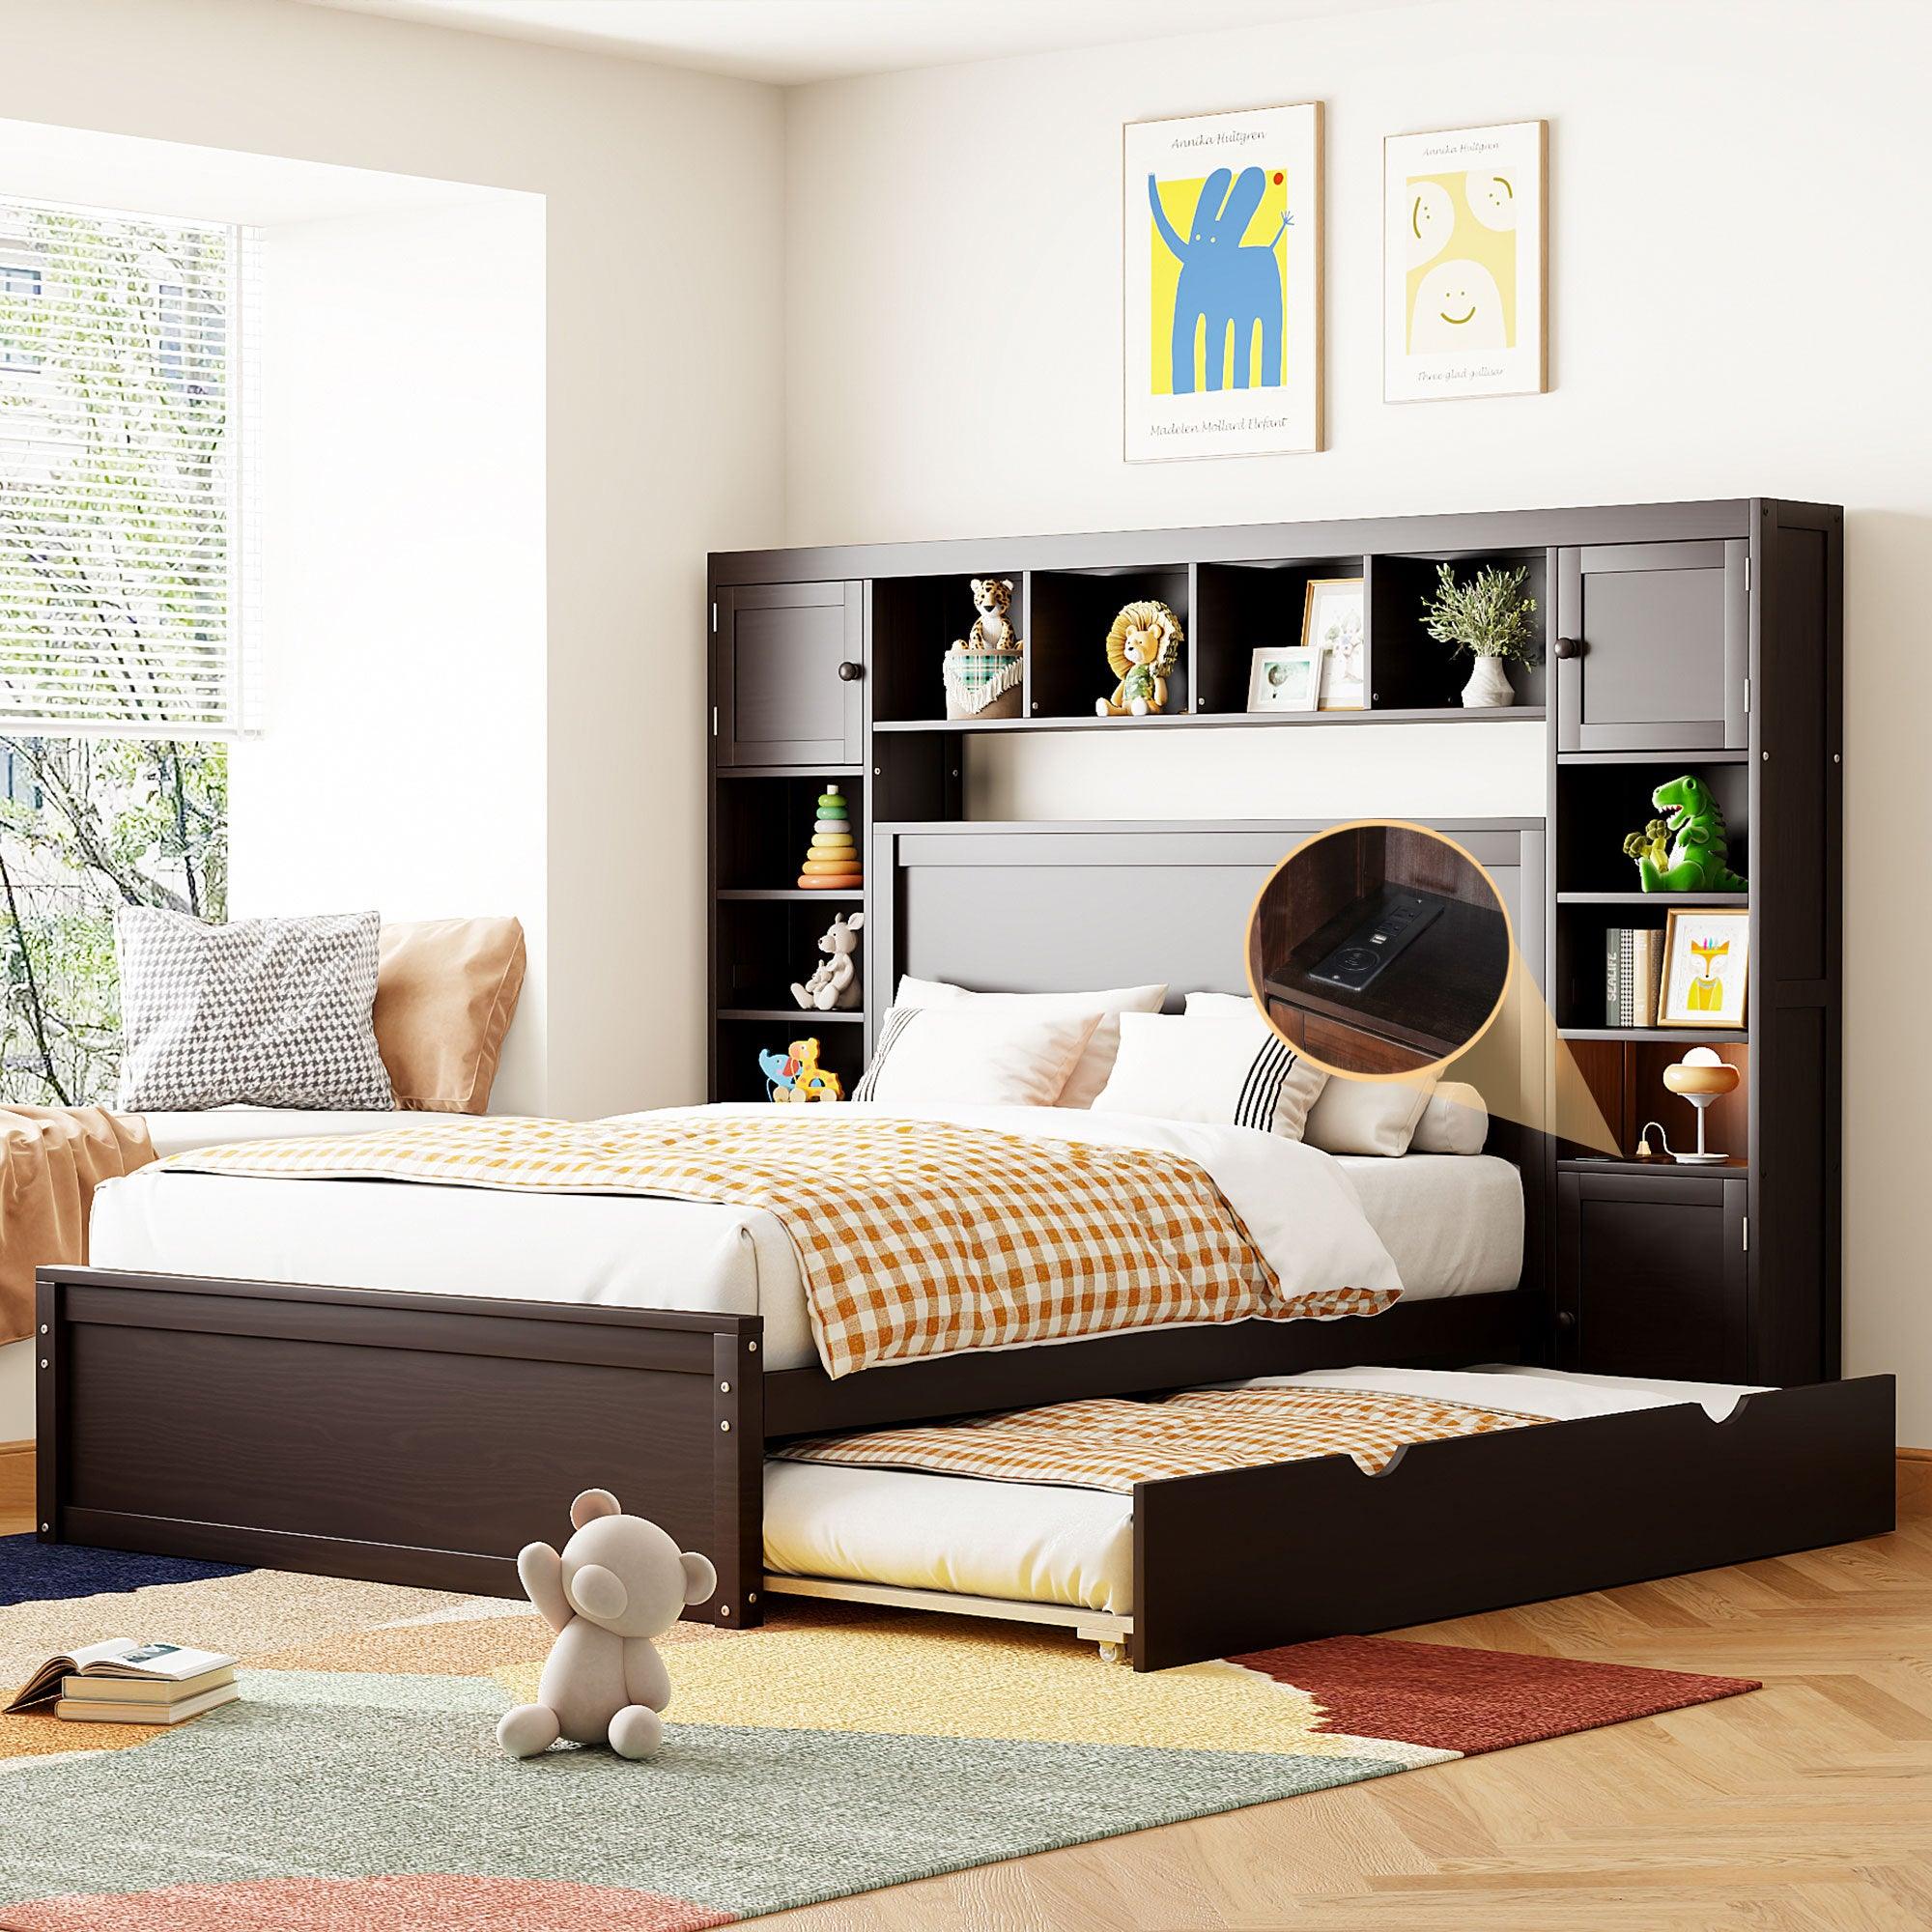 🆓🚛 Full Size Wooden Bed With All-in-One Cabinet, Shelf and Sockets, Espresso